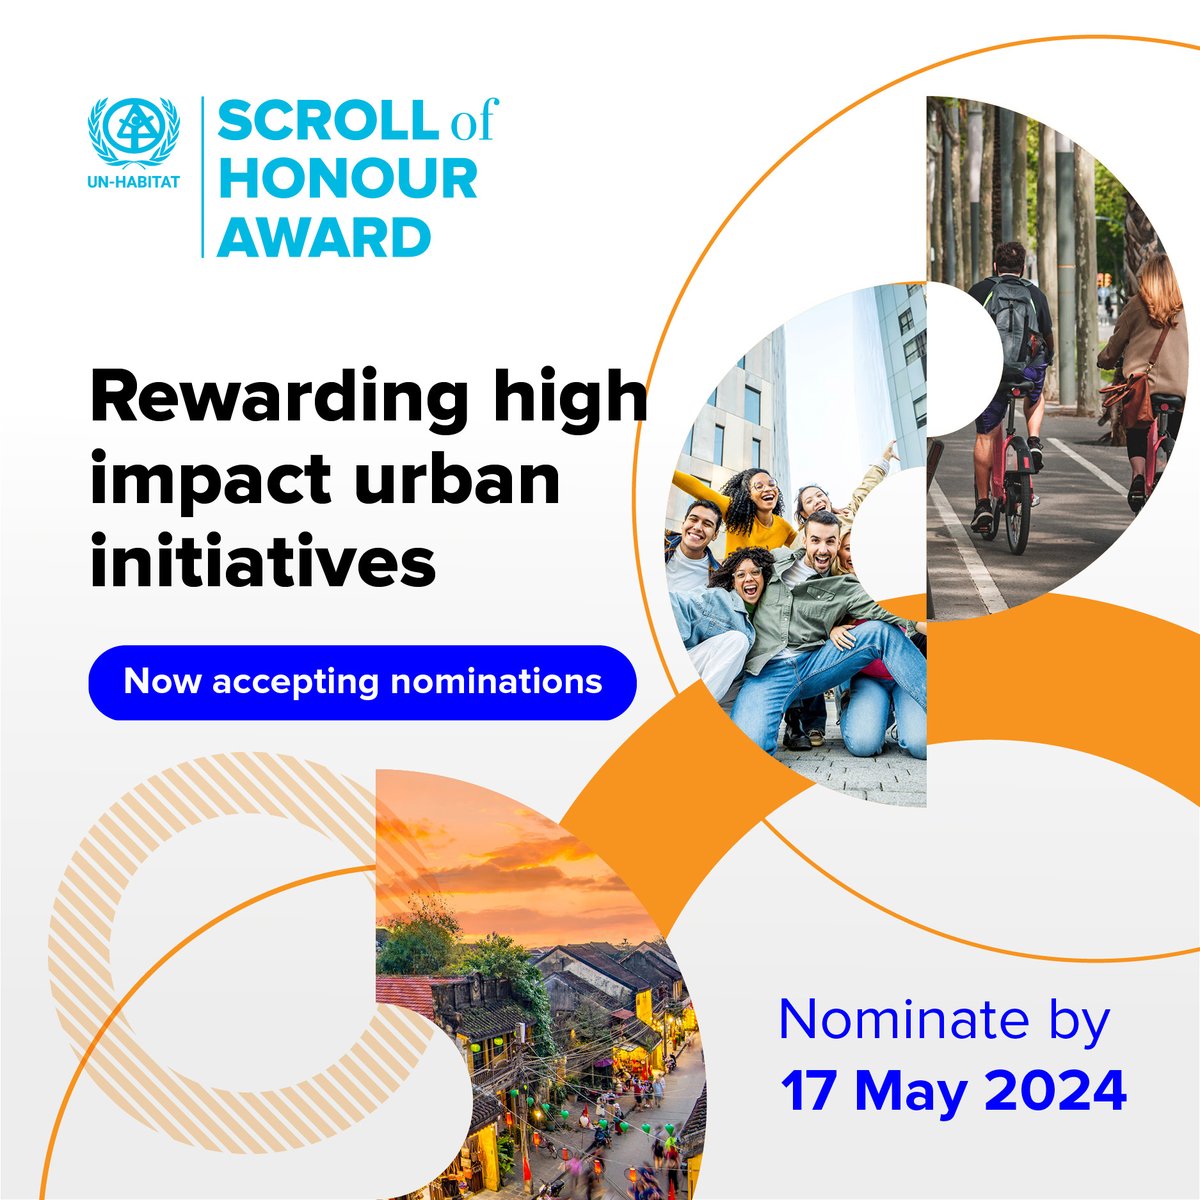 Do you know of an initiative making a difference in our cities? The #ScrollofHonourAward celebrates individuals & institutions working towards: 🔹Improved urban living conditions 🔹Housing for all 🔹Sustainable cities Nominate an initiative today: bit.ly/3uZwh2s